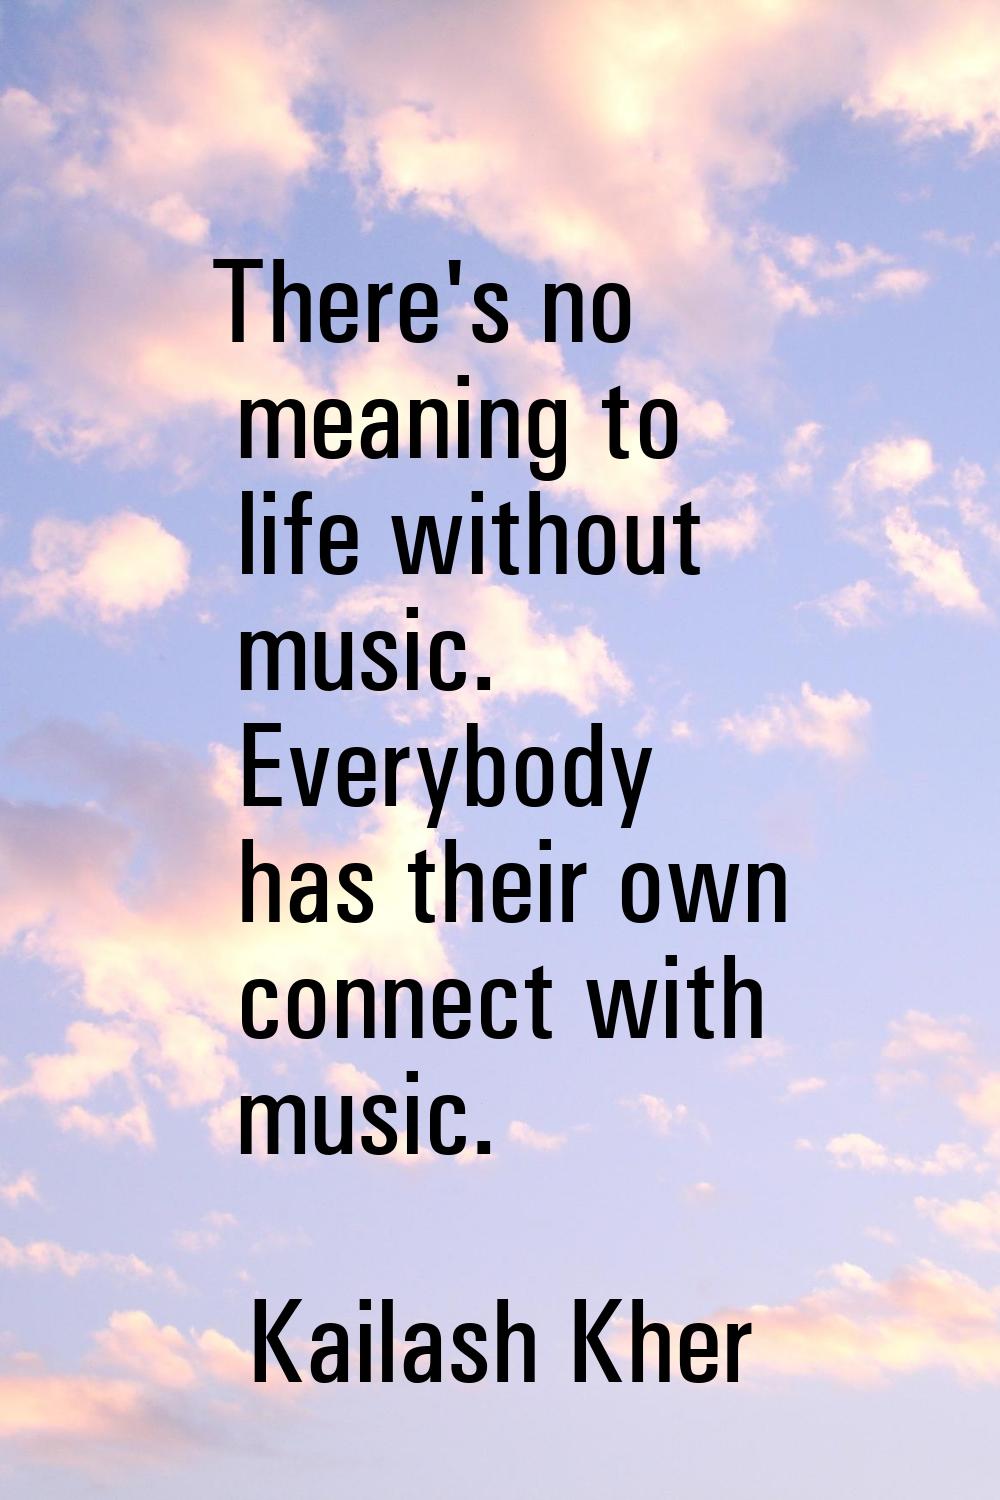 There's no meaning to life without music. Everybody has their own connect with music.